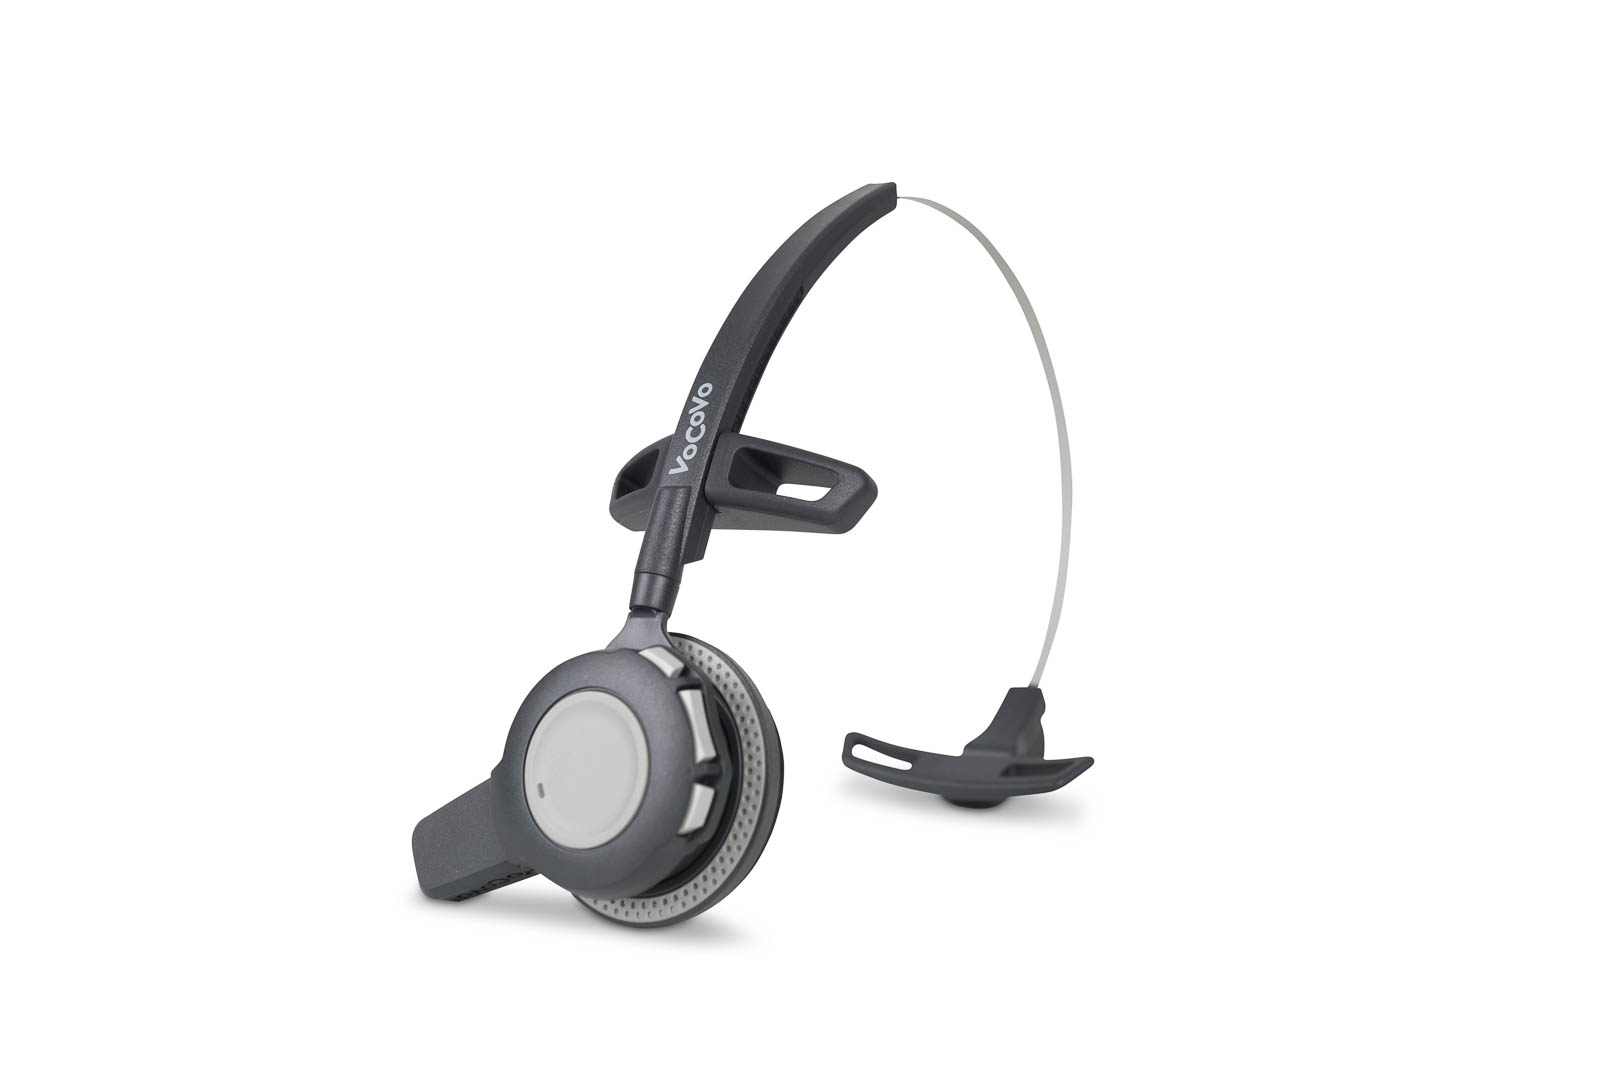 Studio photograph of headset product, shot on a plain white background, ensuring that the product stands out